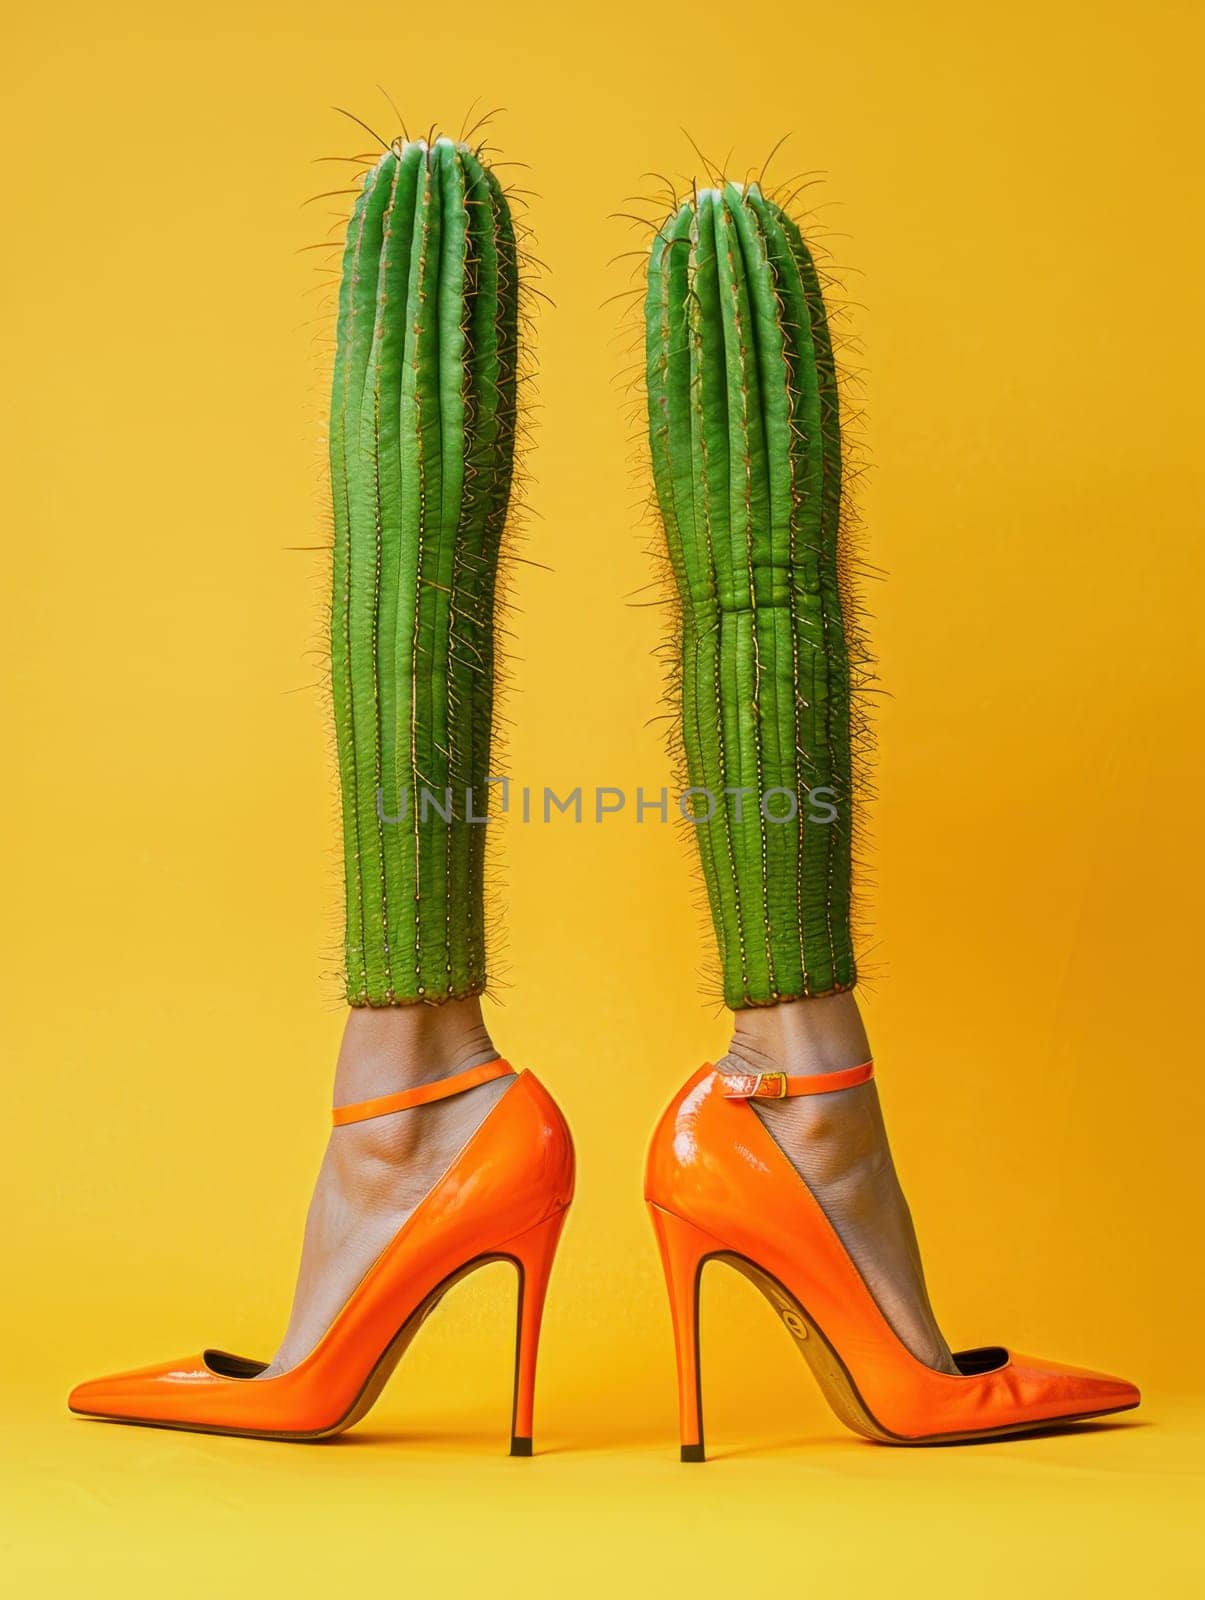 Fashion statement stylish orange heels and desert cactus on vibrant yellow background with legs in frame